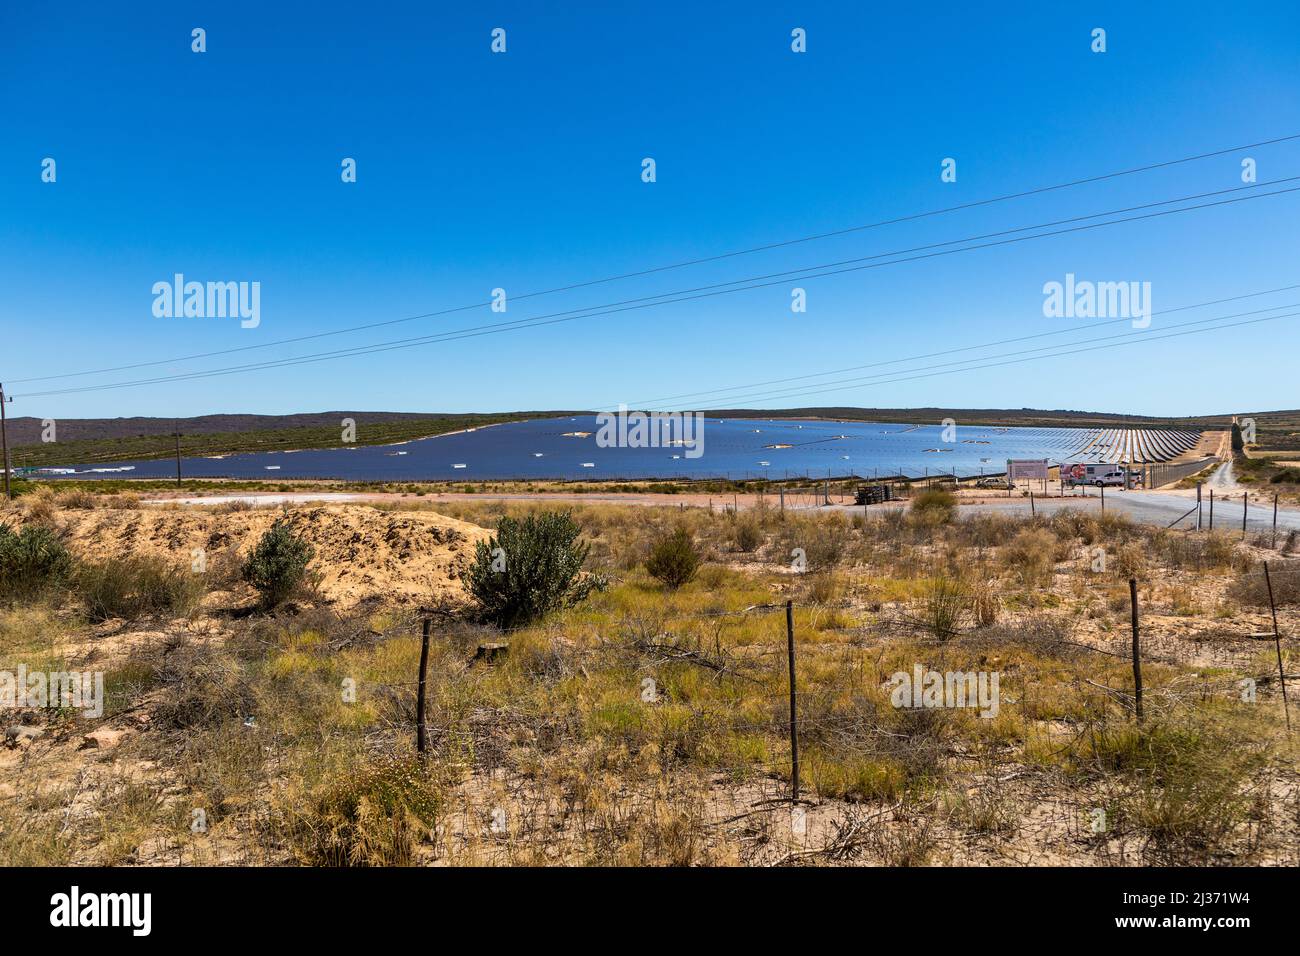 Large solar farm in a remote semi desert area, with paralel rows of photovoltaic panels. no clouds in the sky Stock Photo